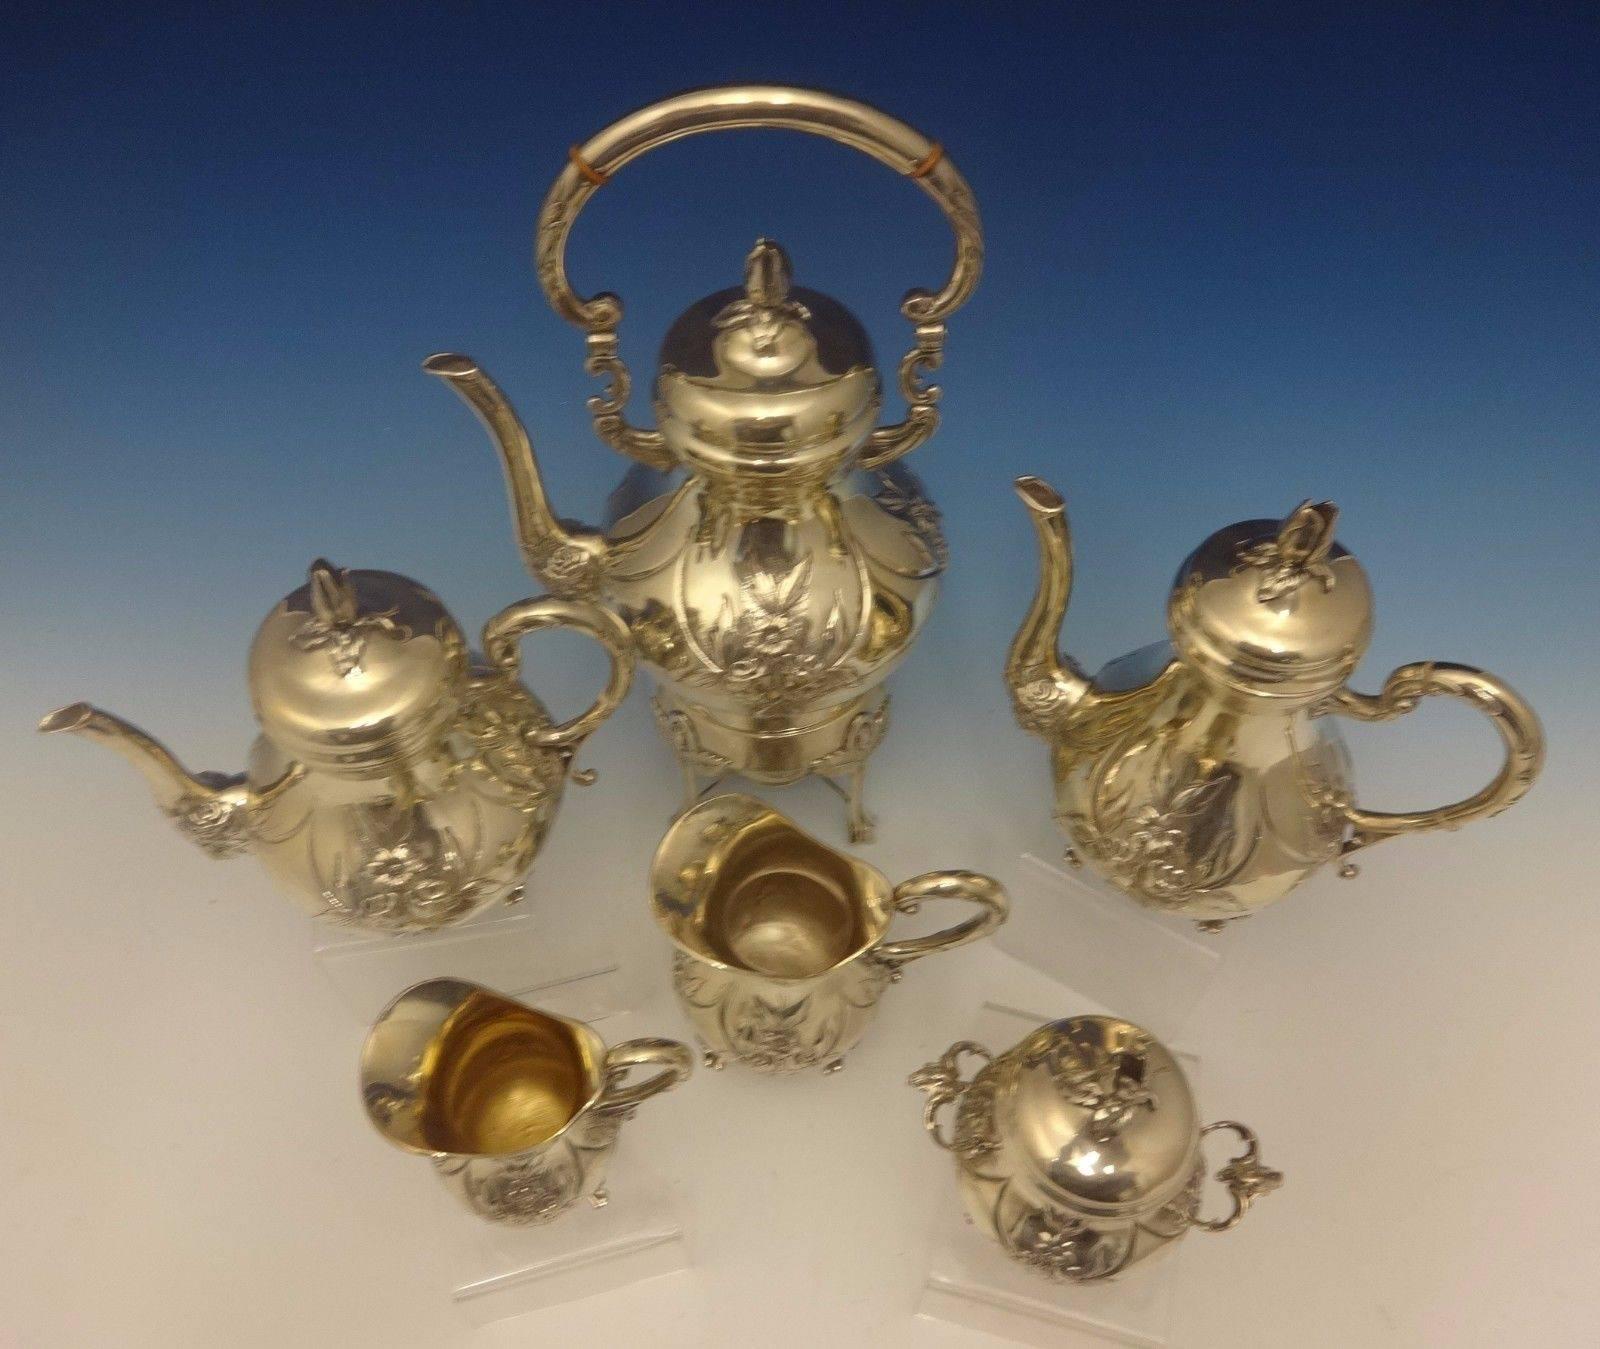 German silver.

Sterling silver six-piece tea set marked Handarbeit which means handmade in German. It features hand chased and applied flowers, including rose blossom finials. The set includes:

Coffee pot: Measures 9